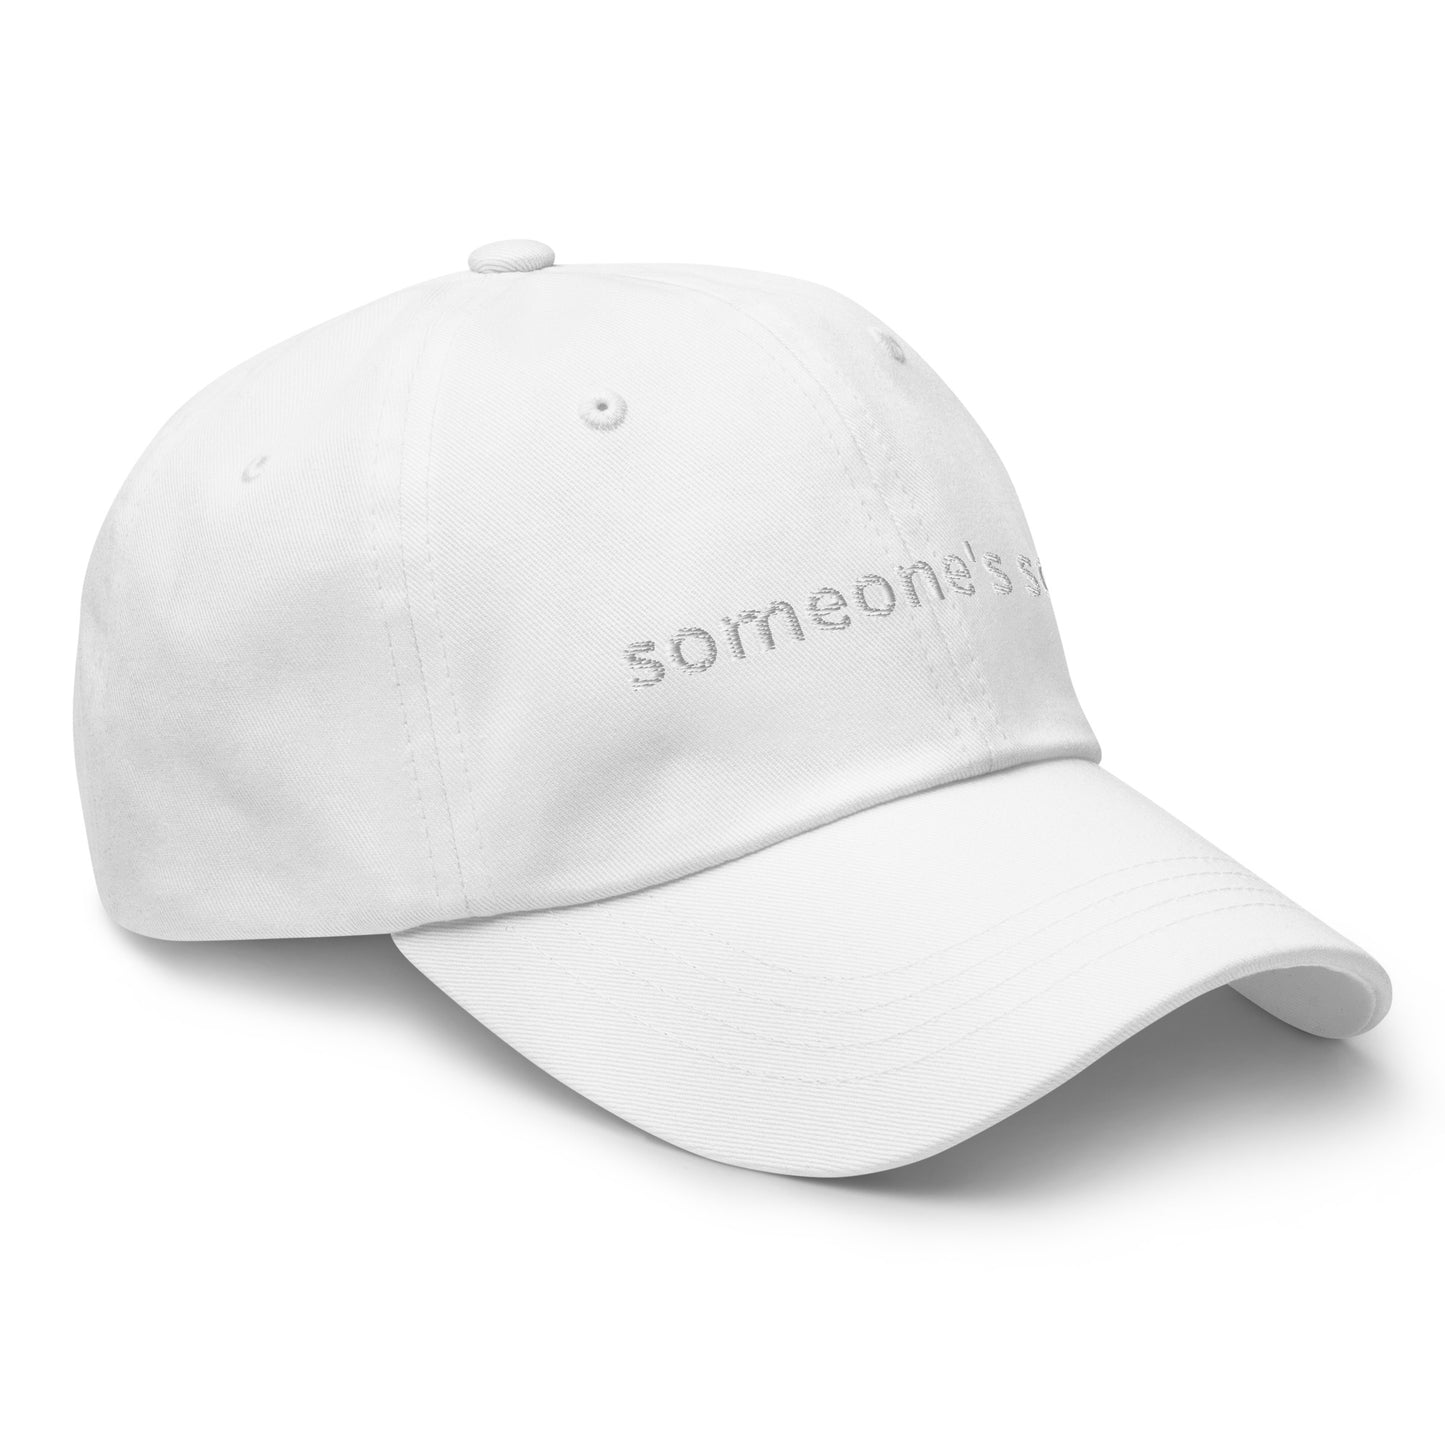 Someone's son dad hat